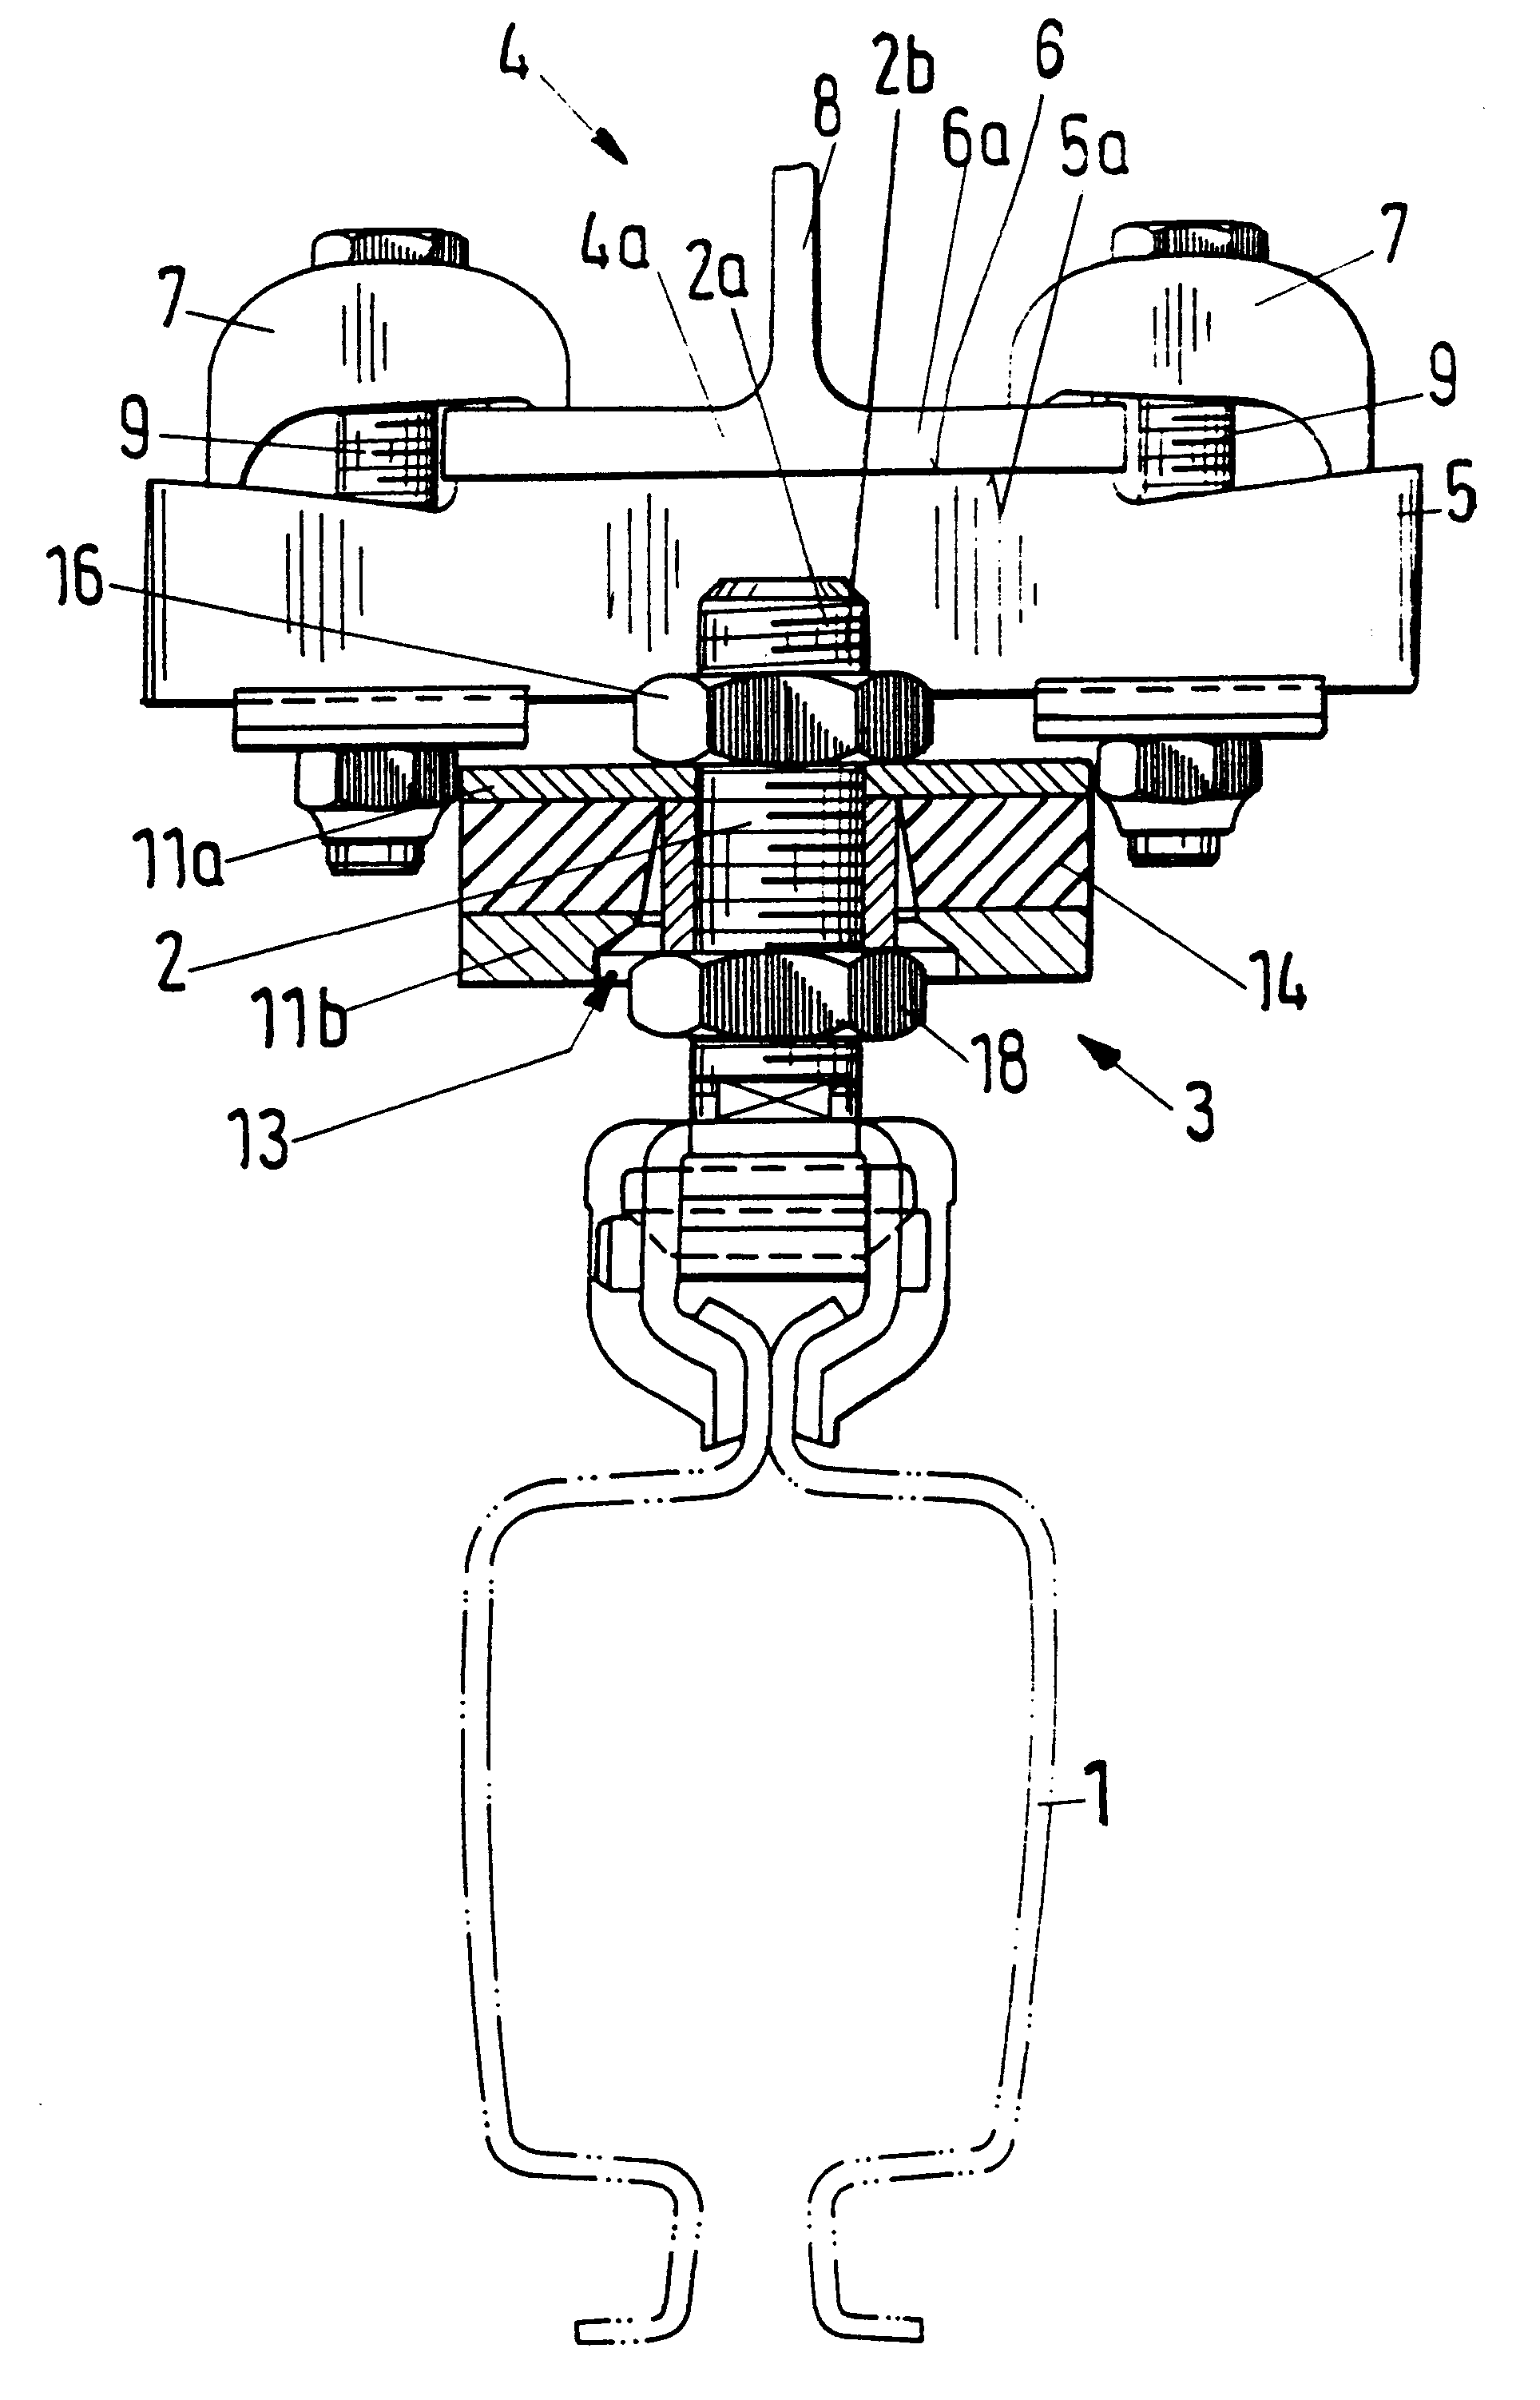 Device for suspension of a hollow section rail which opens downward in a suspension crane